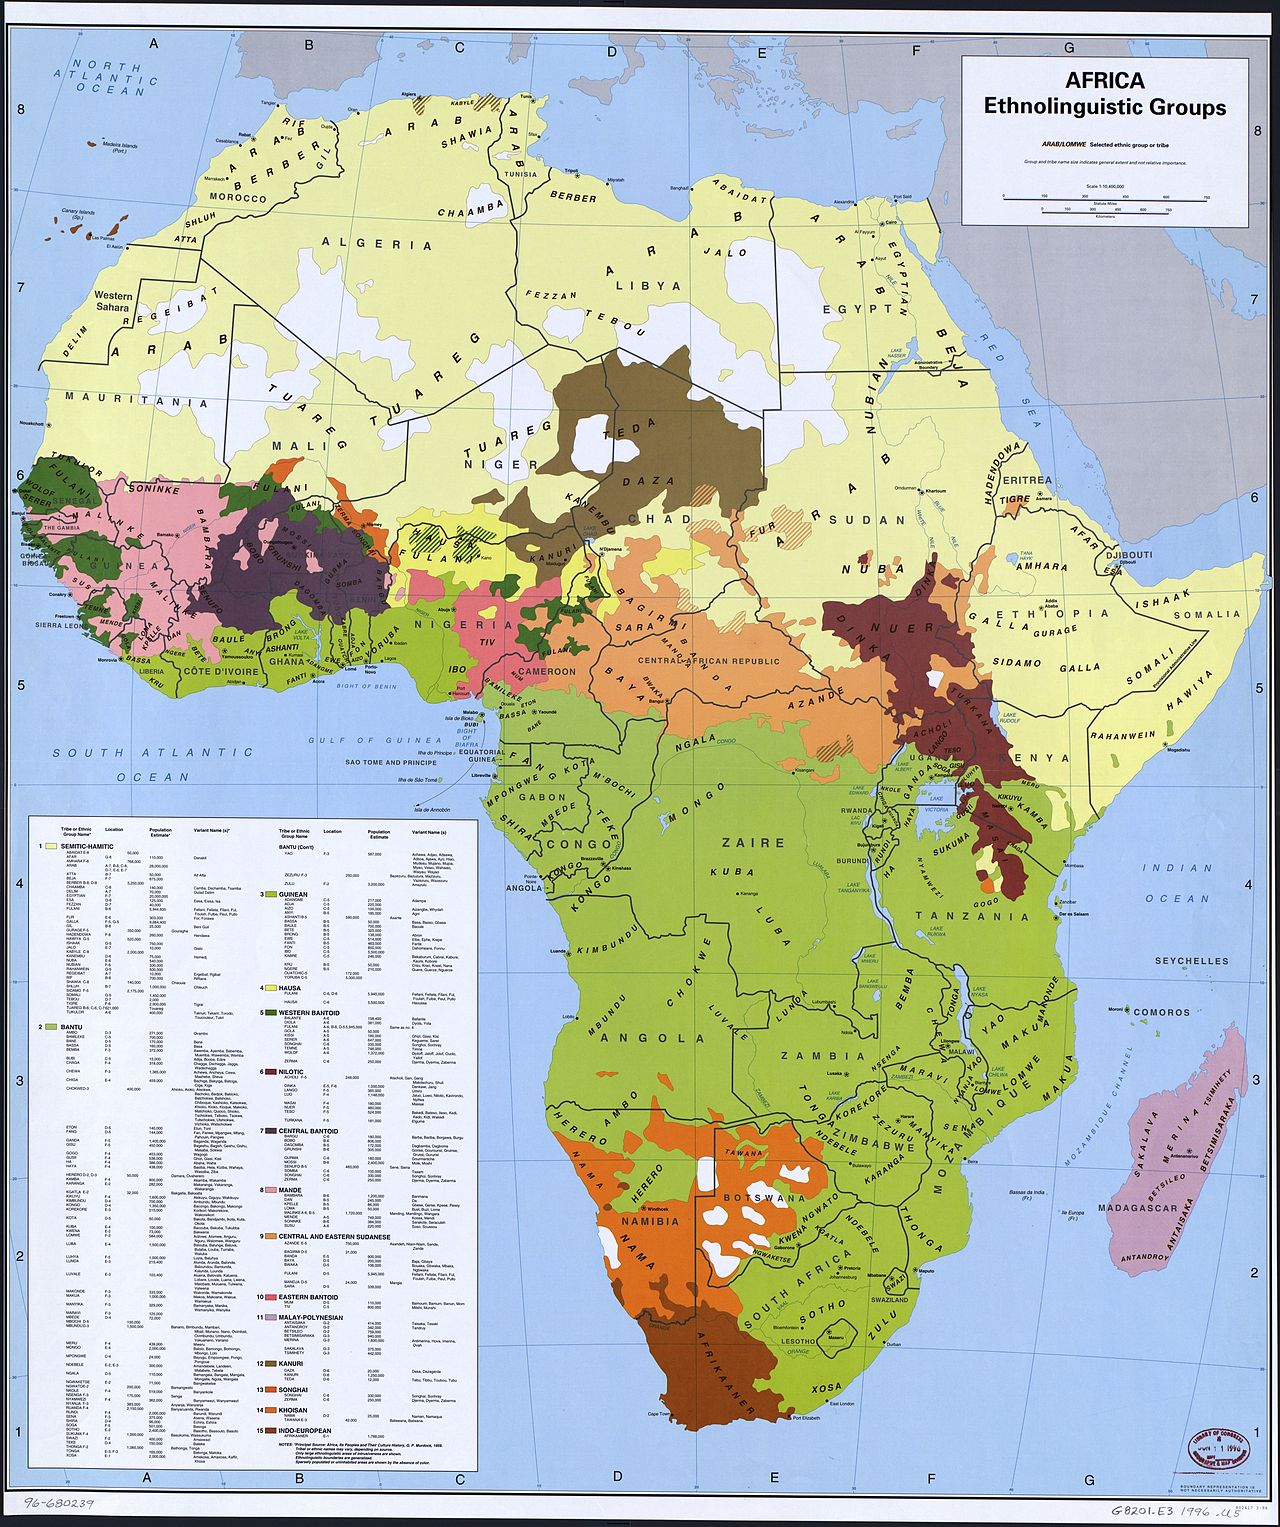 Map of Africa with different ethnocultural groups highlighted